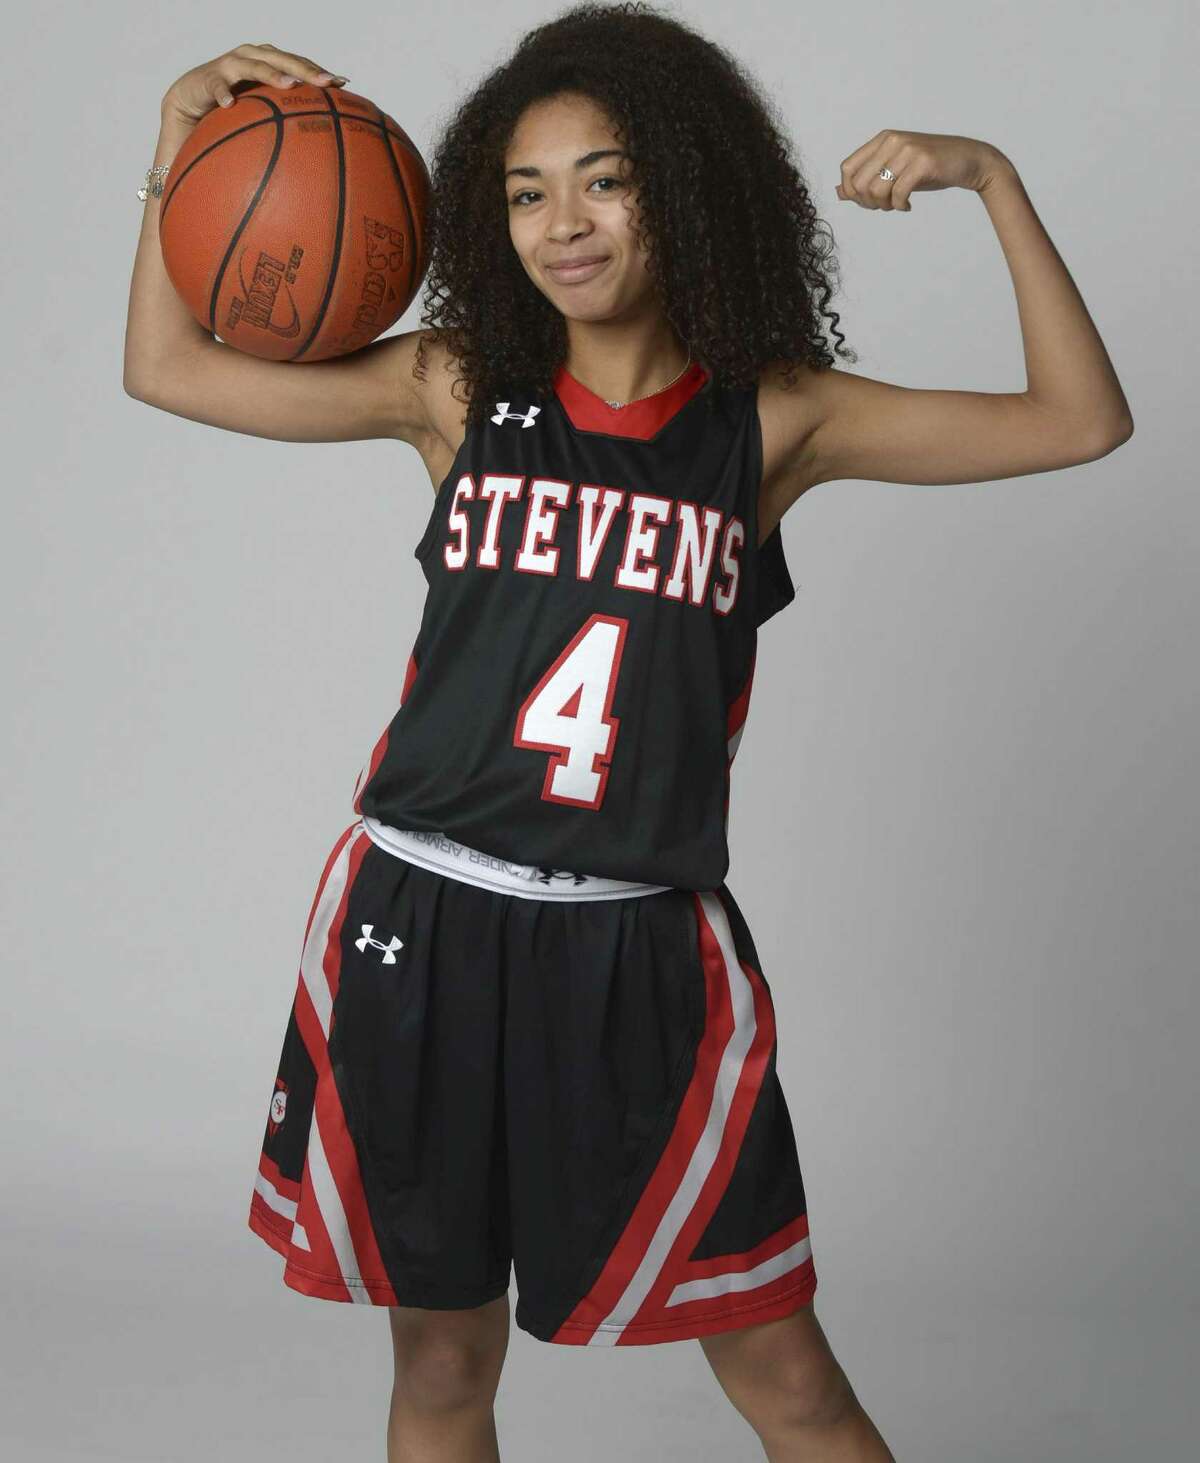 Destiny Jenkins - Junior guard, Stevens A fearless shooter, Jenkins made 97 3-pointers and averaged 21.6 points, 4.5 rebounds, 3.7 assists and 5.1 steals last season. Jenkins earned a spot on the Express-News All-Area Super Team last season. She was named the E-N’s Newcomer of the Year two seasons ago.